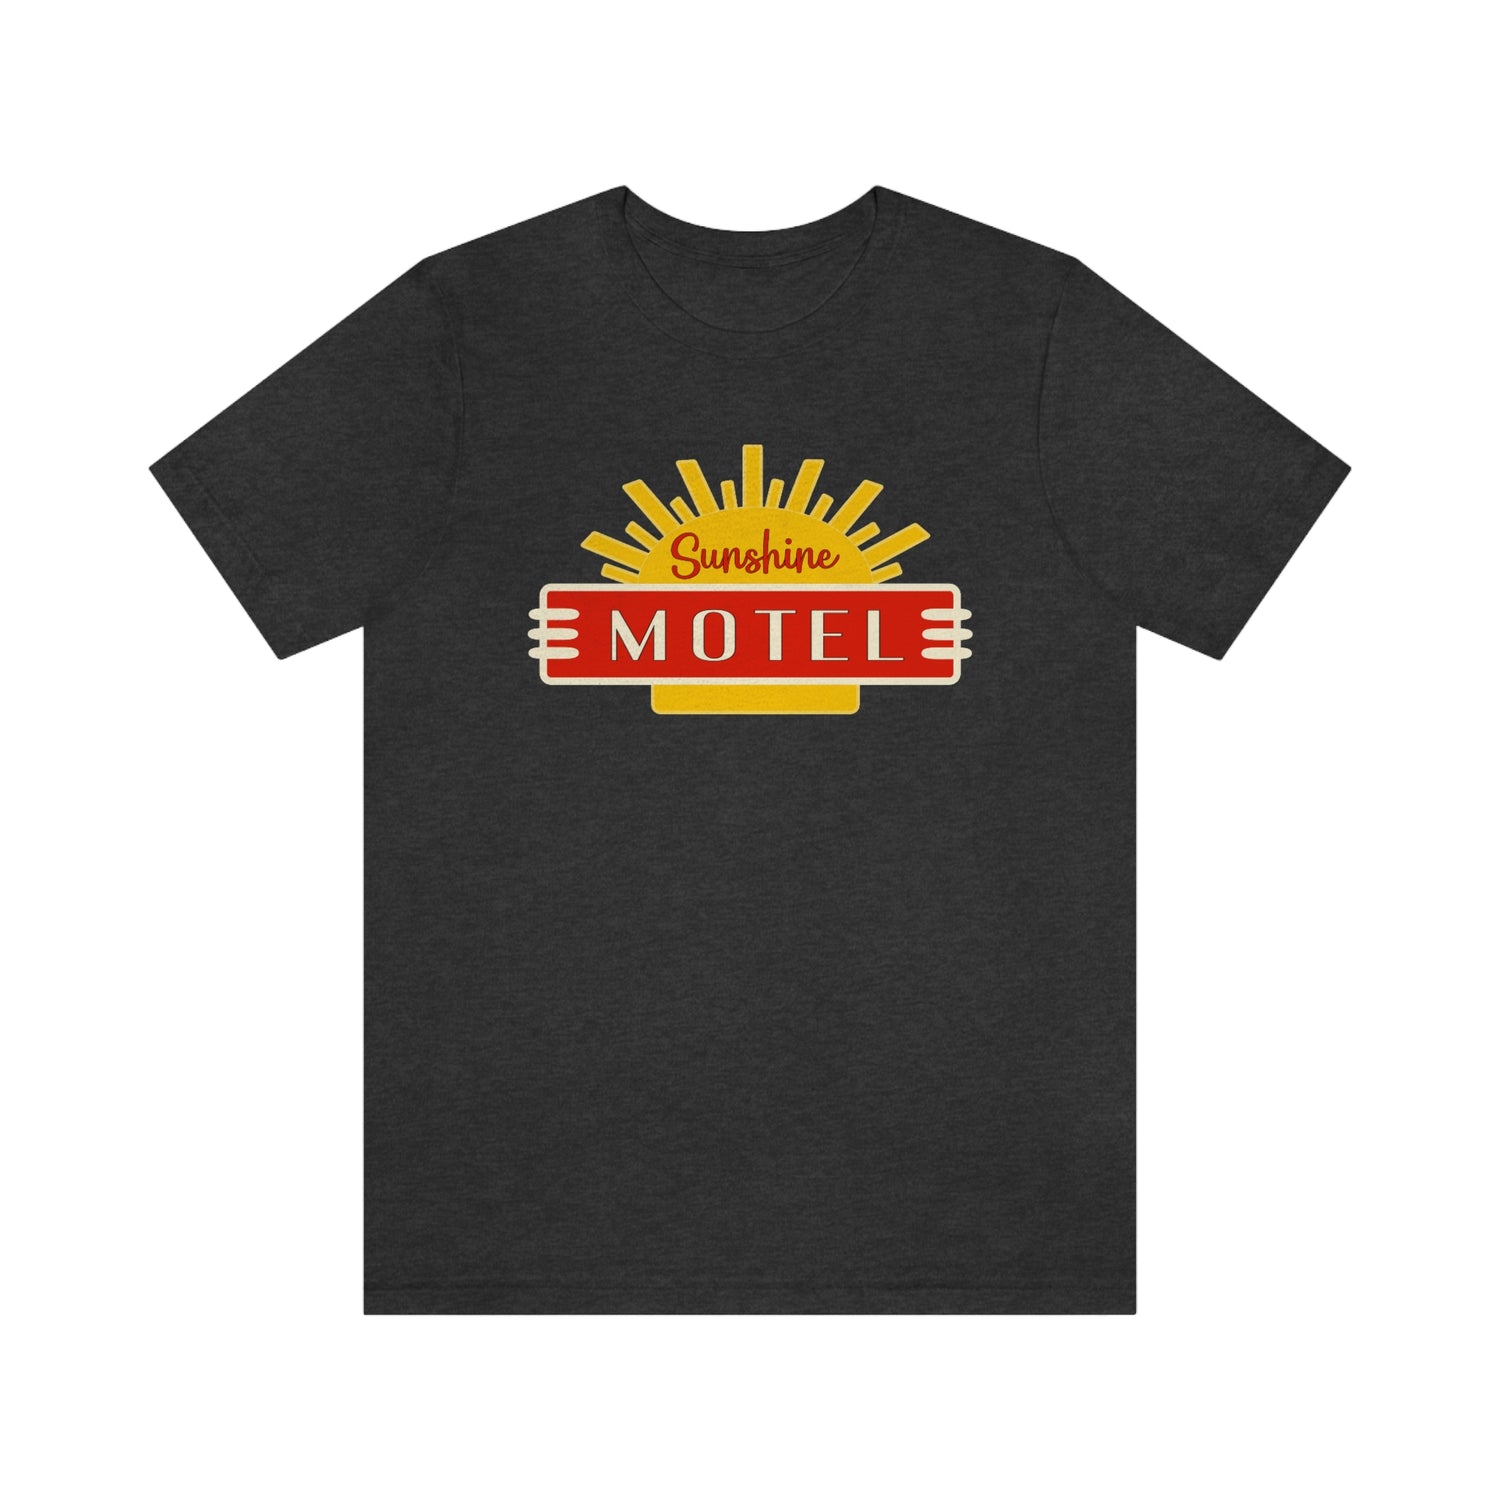 The Lost Room Inspired Sunshine Motel Tshirt Lord and Lady Towers